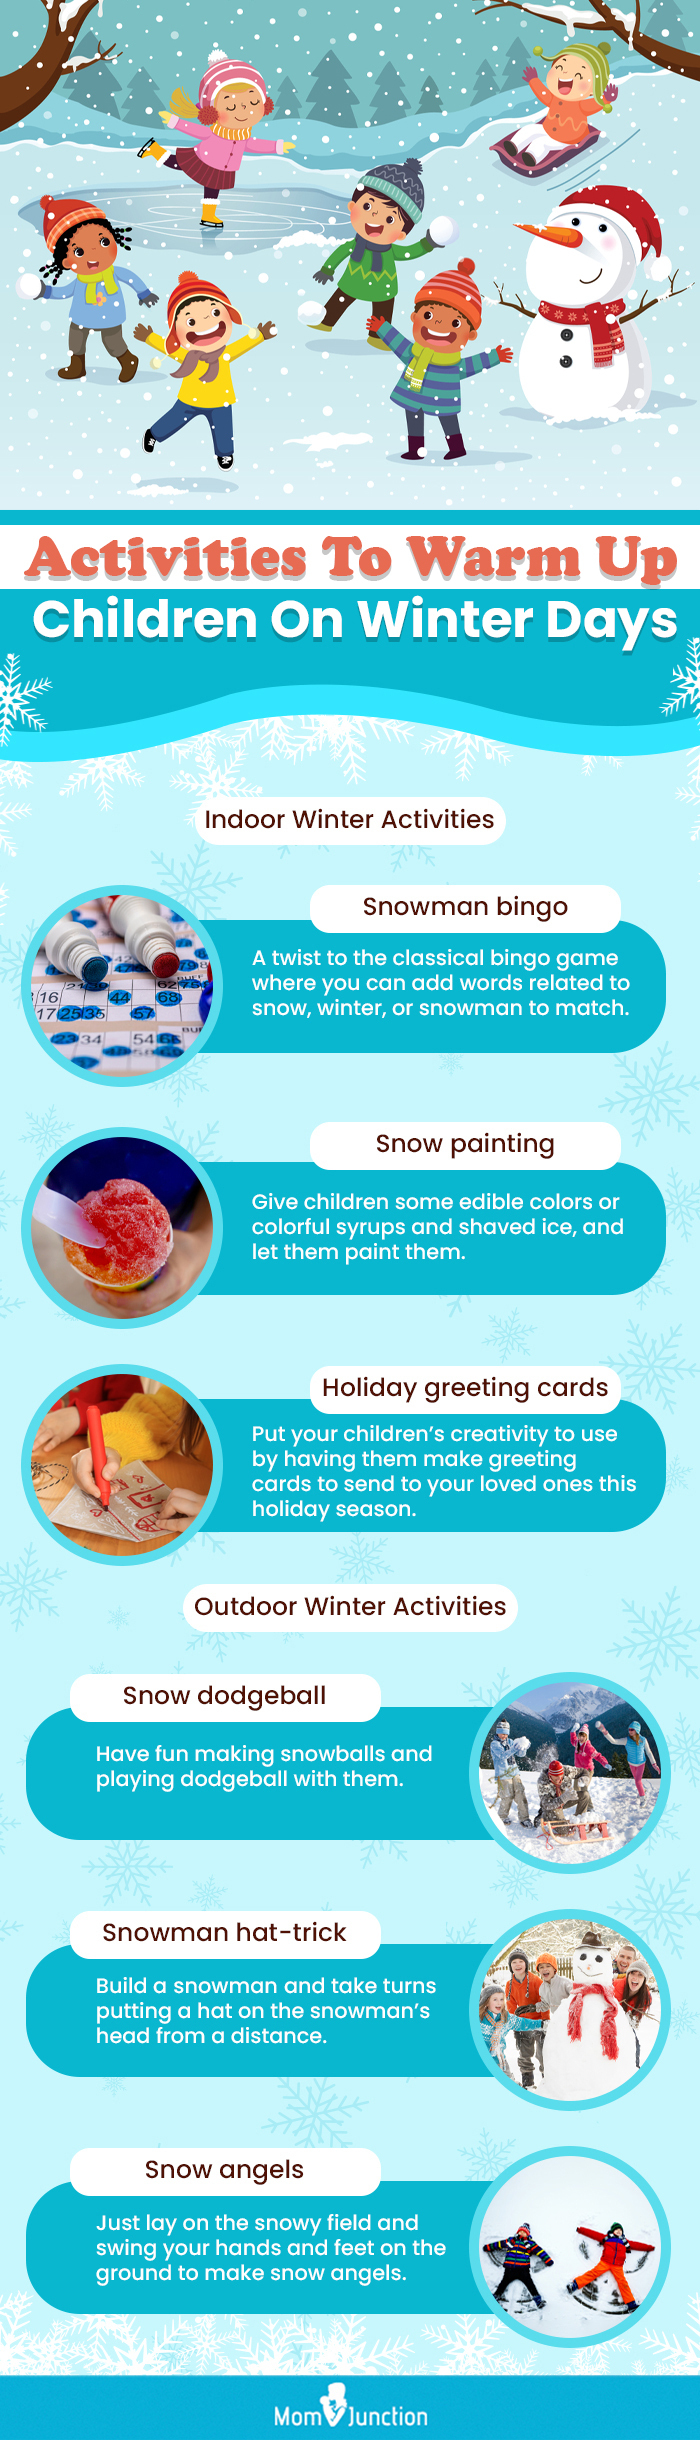 activities for children to warm them up on winter days (infographic)